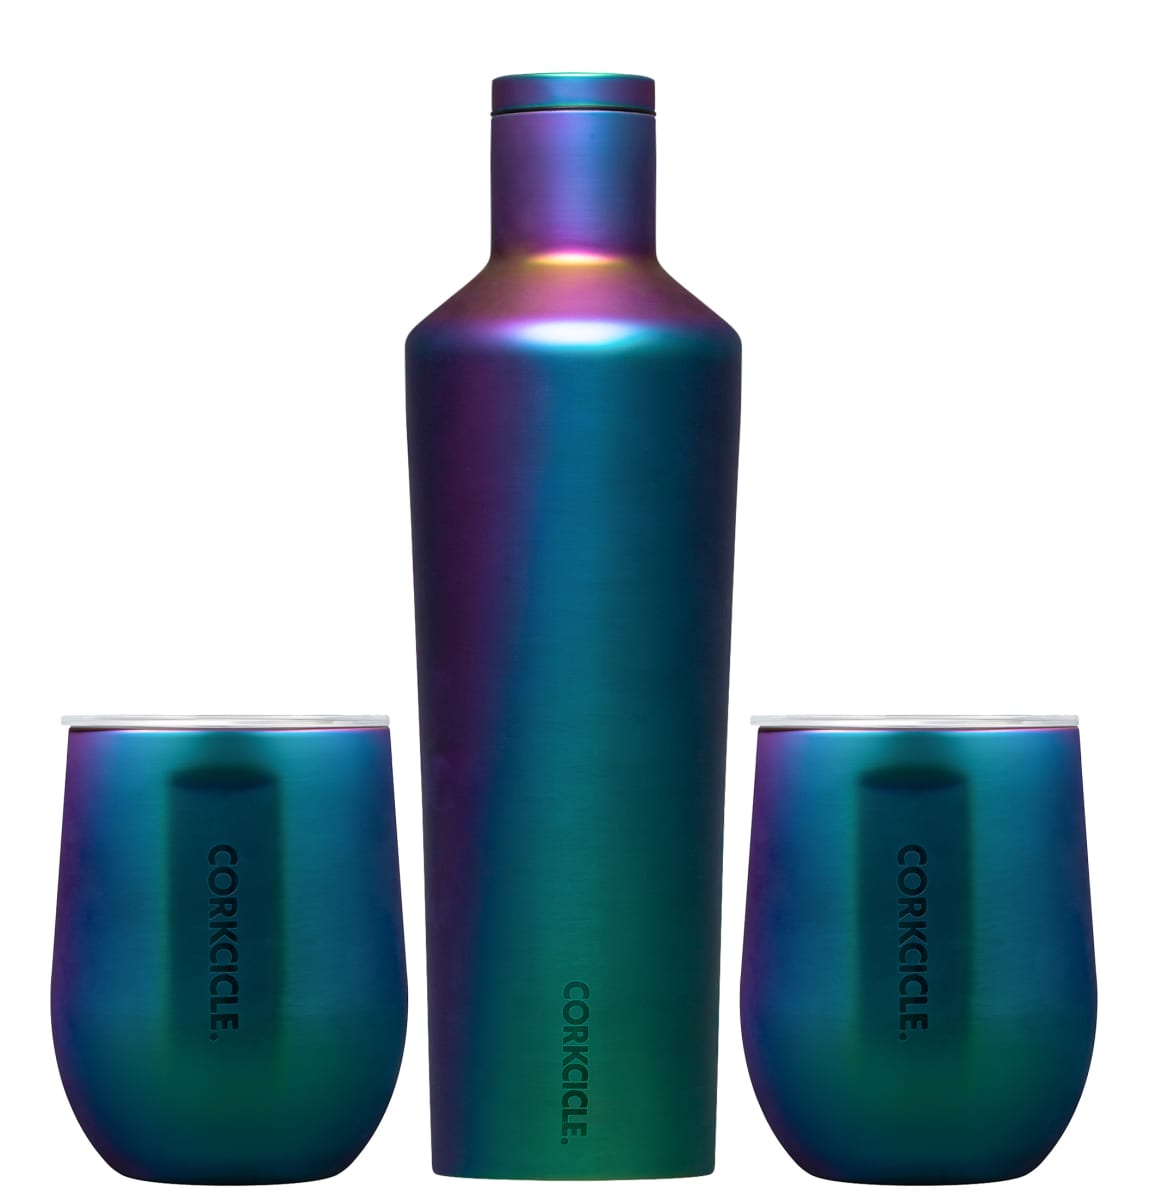 Corkcicle Gift Set in Dragonfly